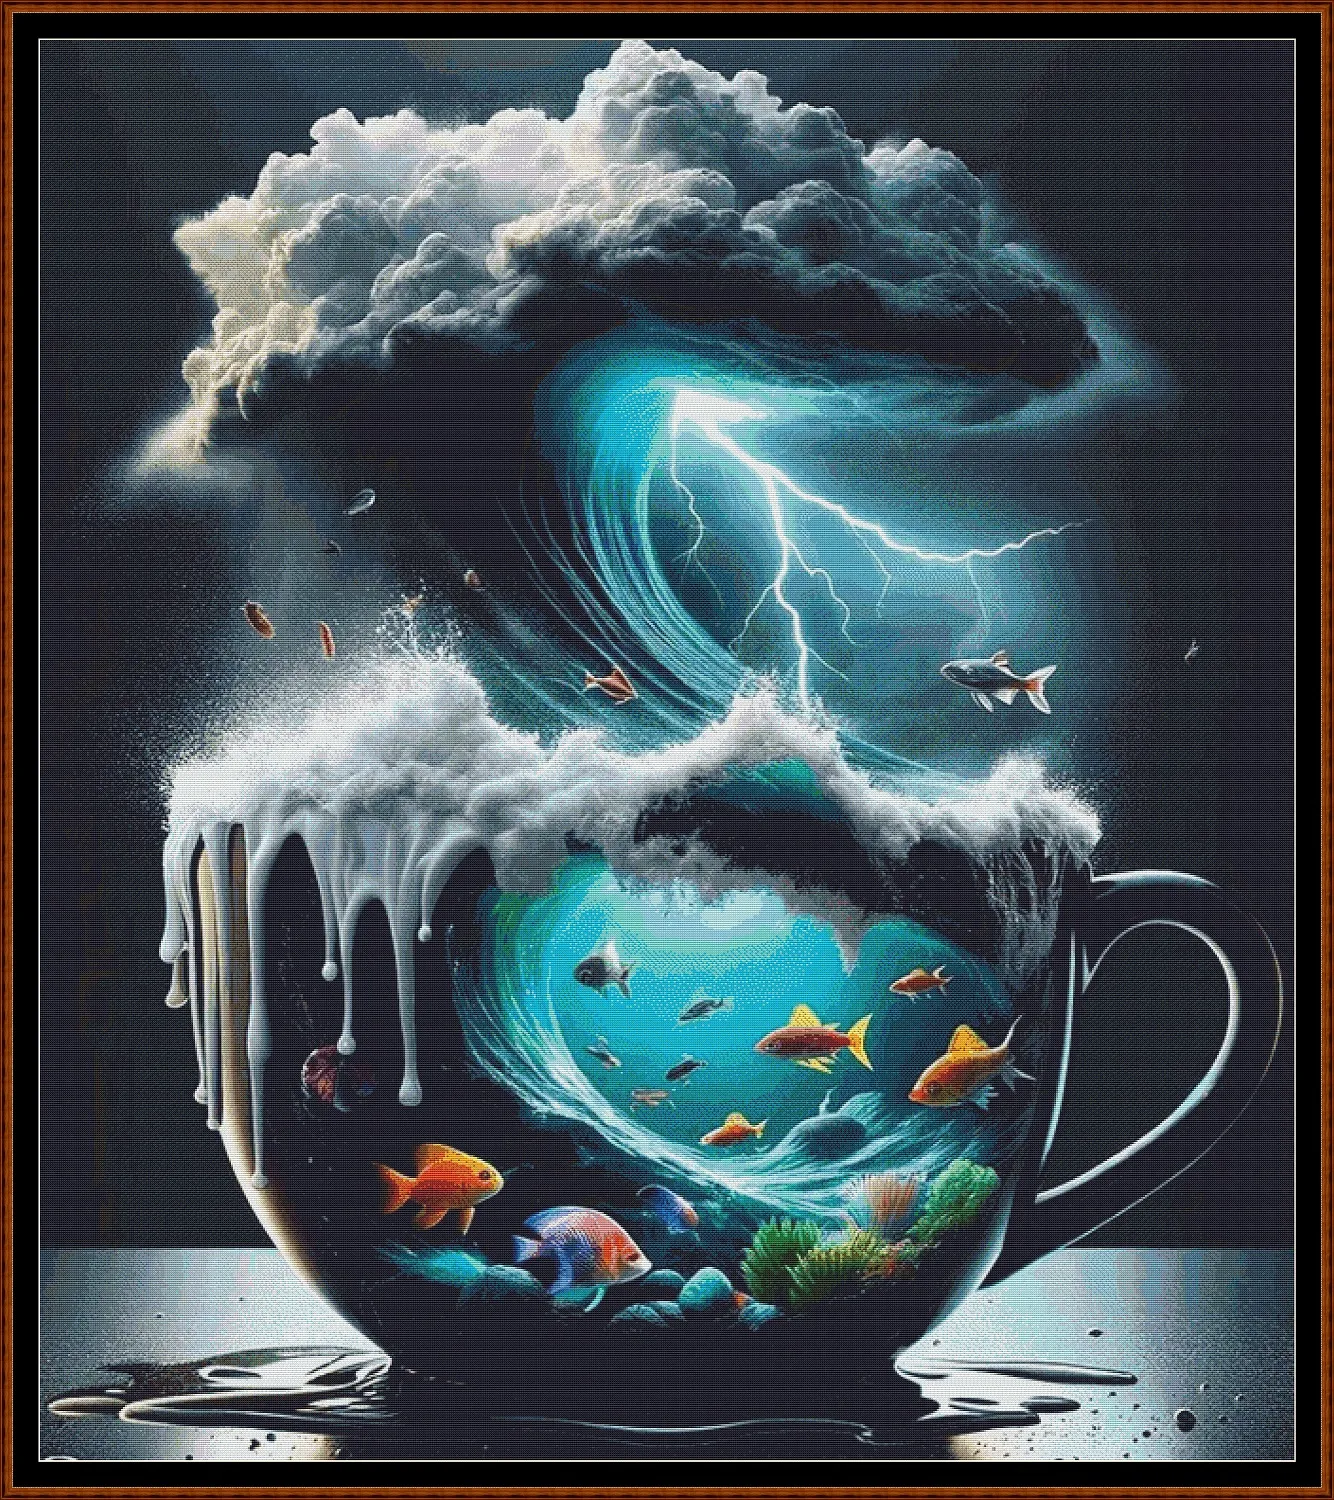 Expertly created from art by Bilal Bashir, under Public Domain CC0 license, Storm In A Teacup cross stitch patterns.